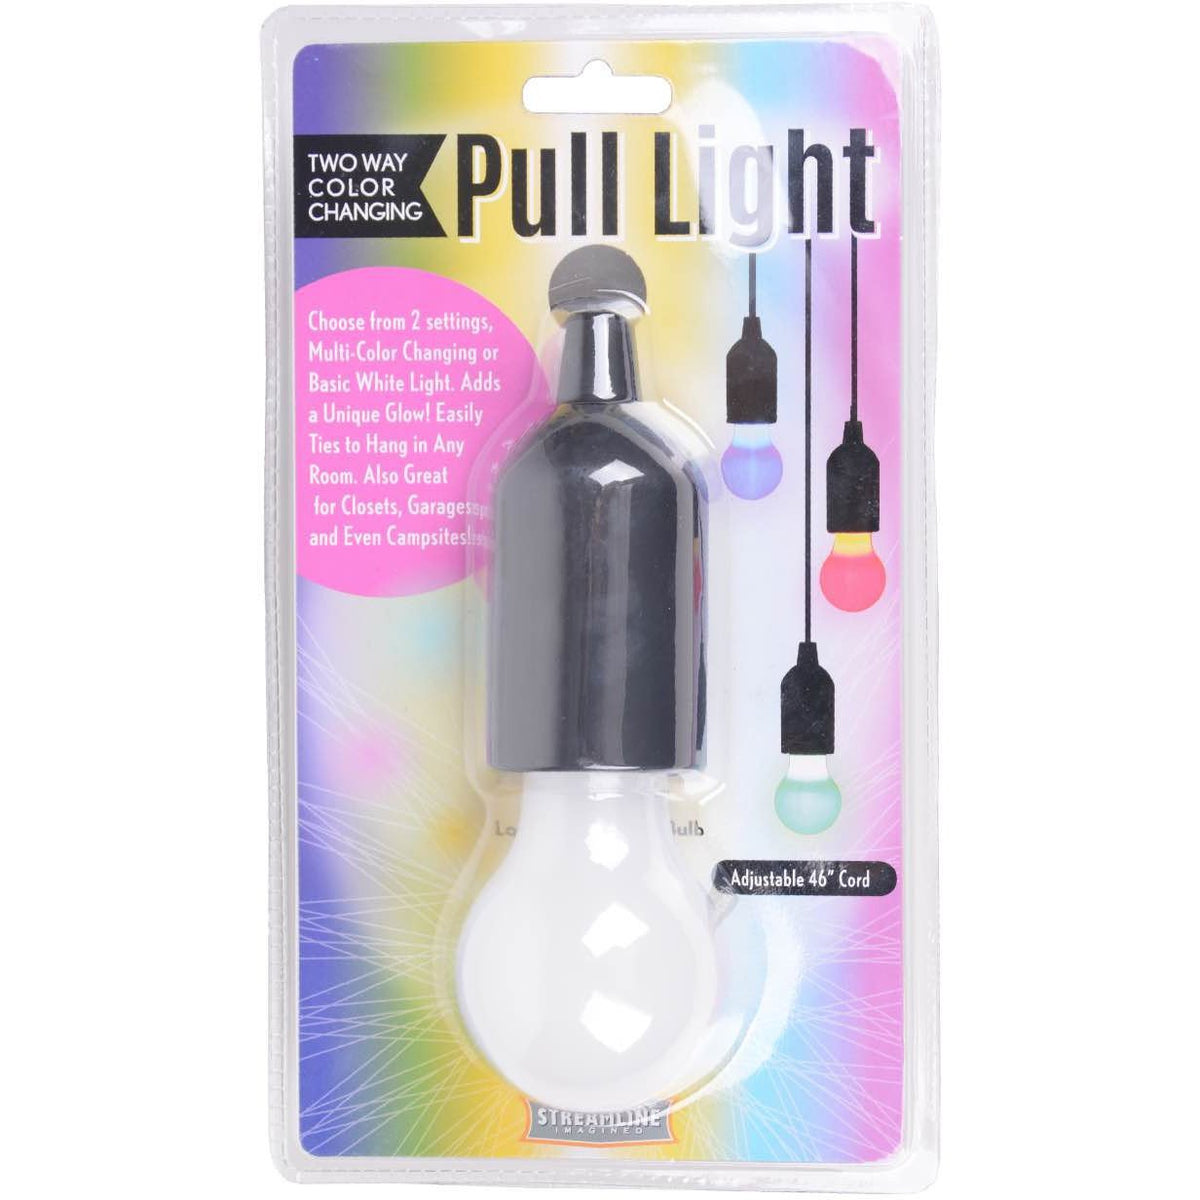 Two Way Color Changing Pull Light